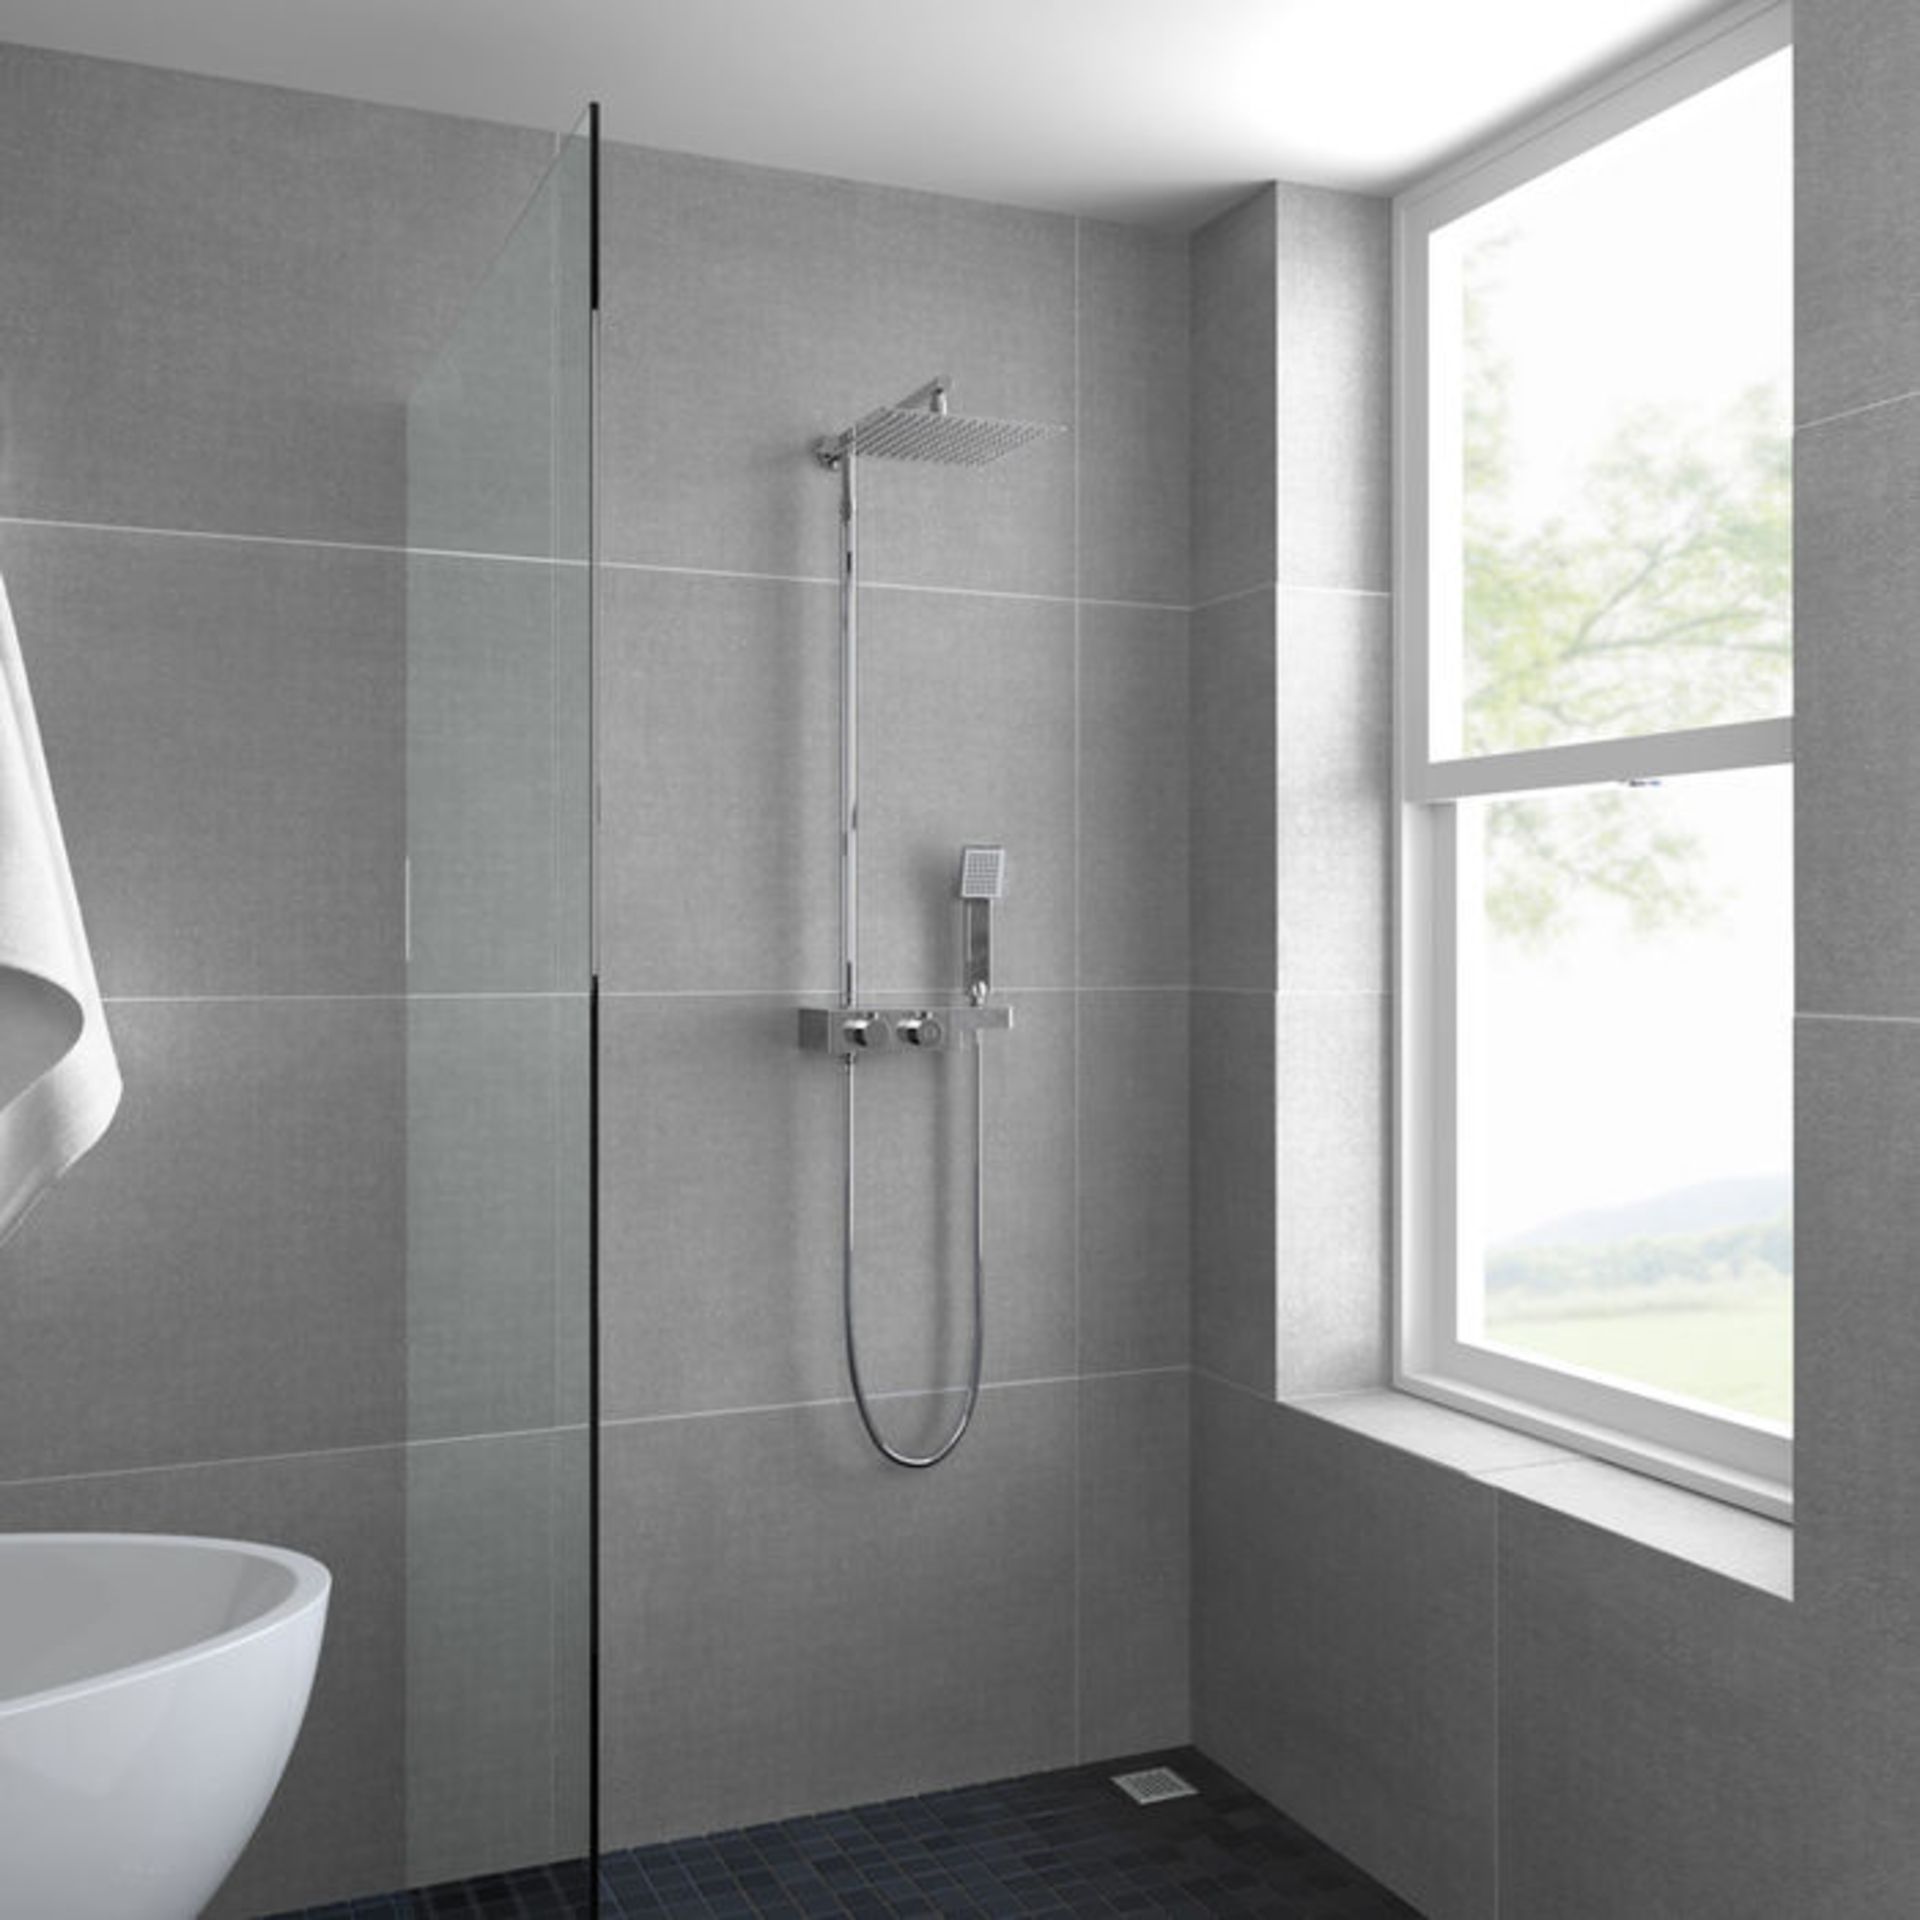 (G62) Square Exposed Thermostatic Shower Shelf, Kit & Large Head. Style meets function with our - Image 4 of 6